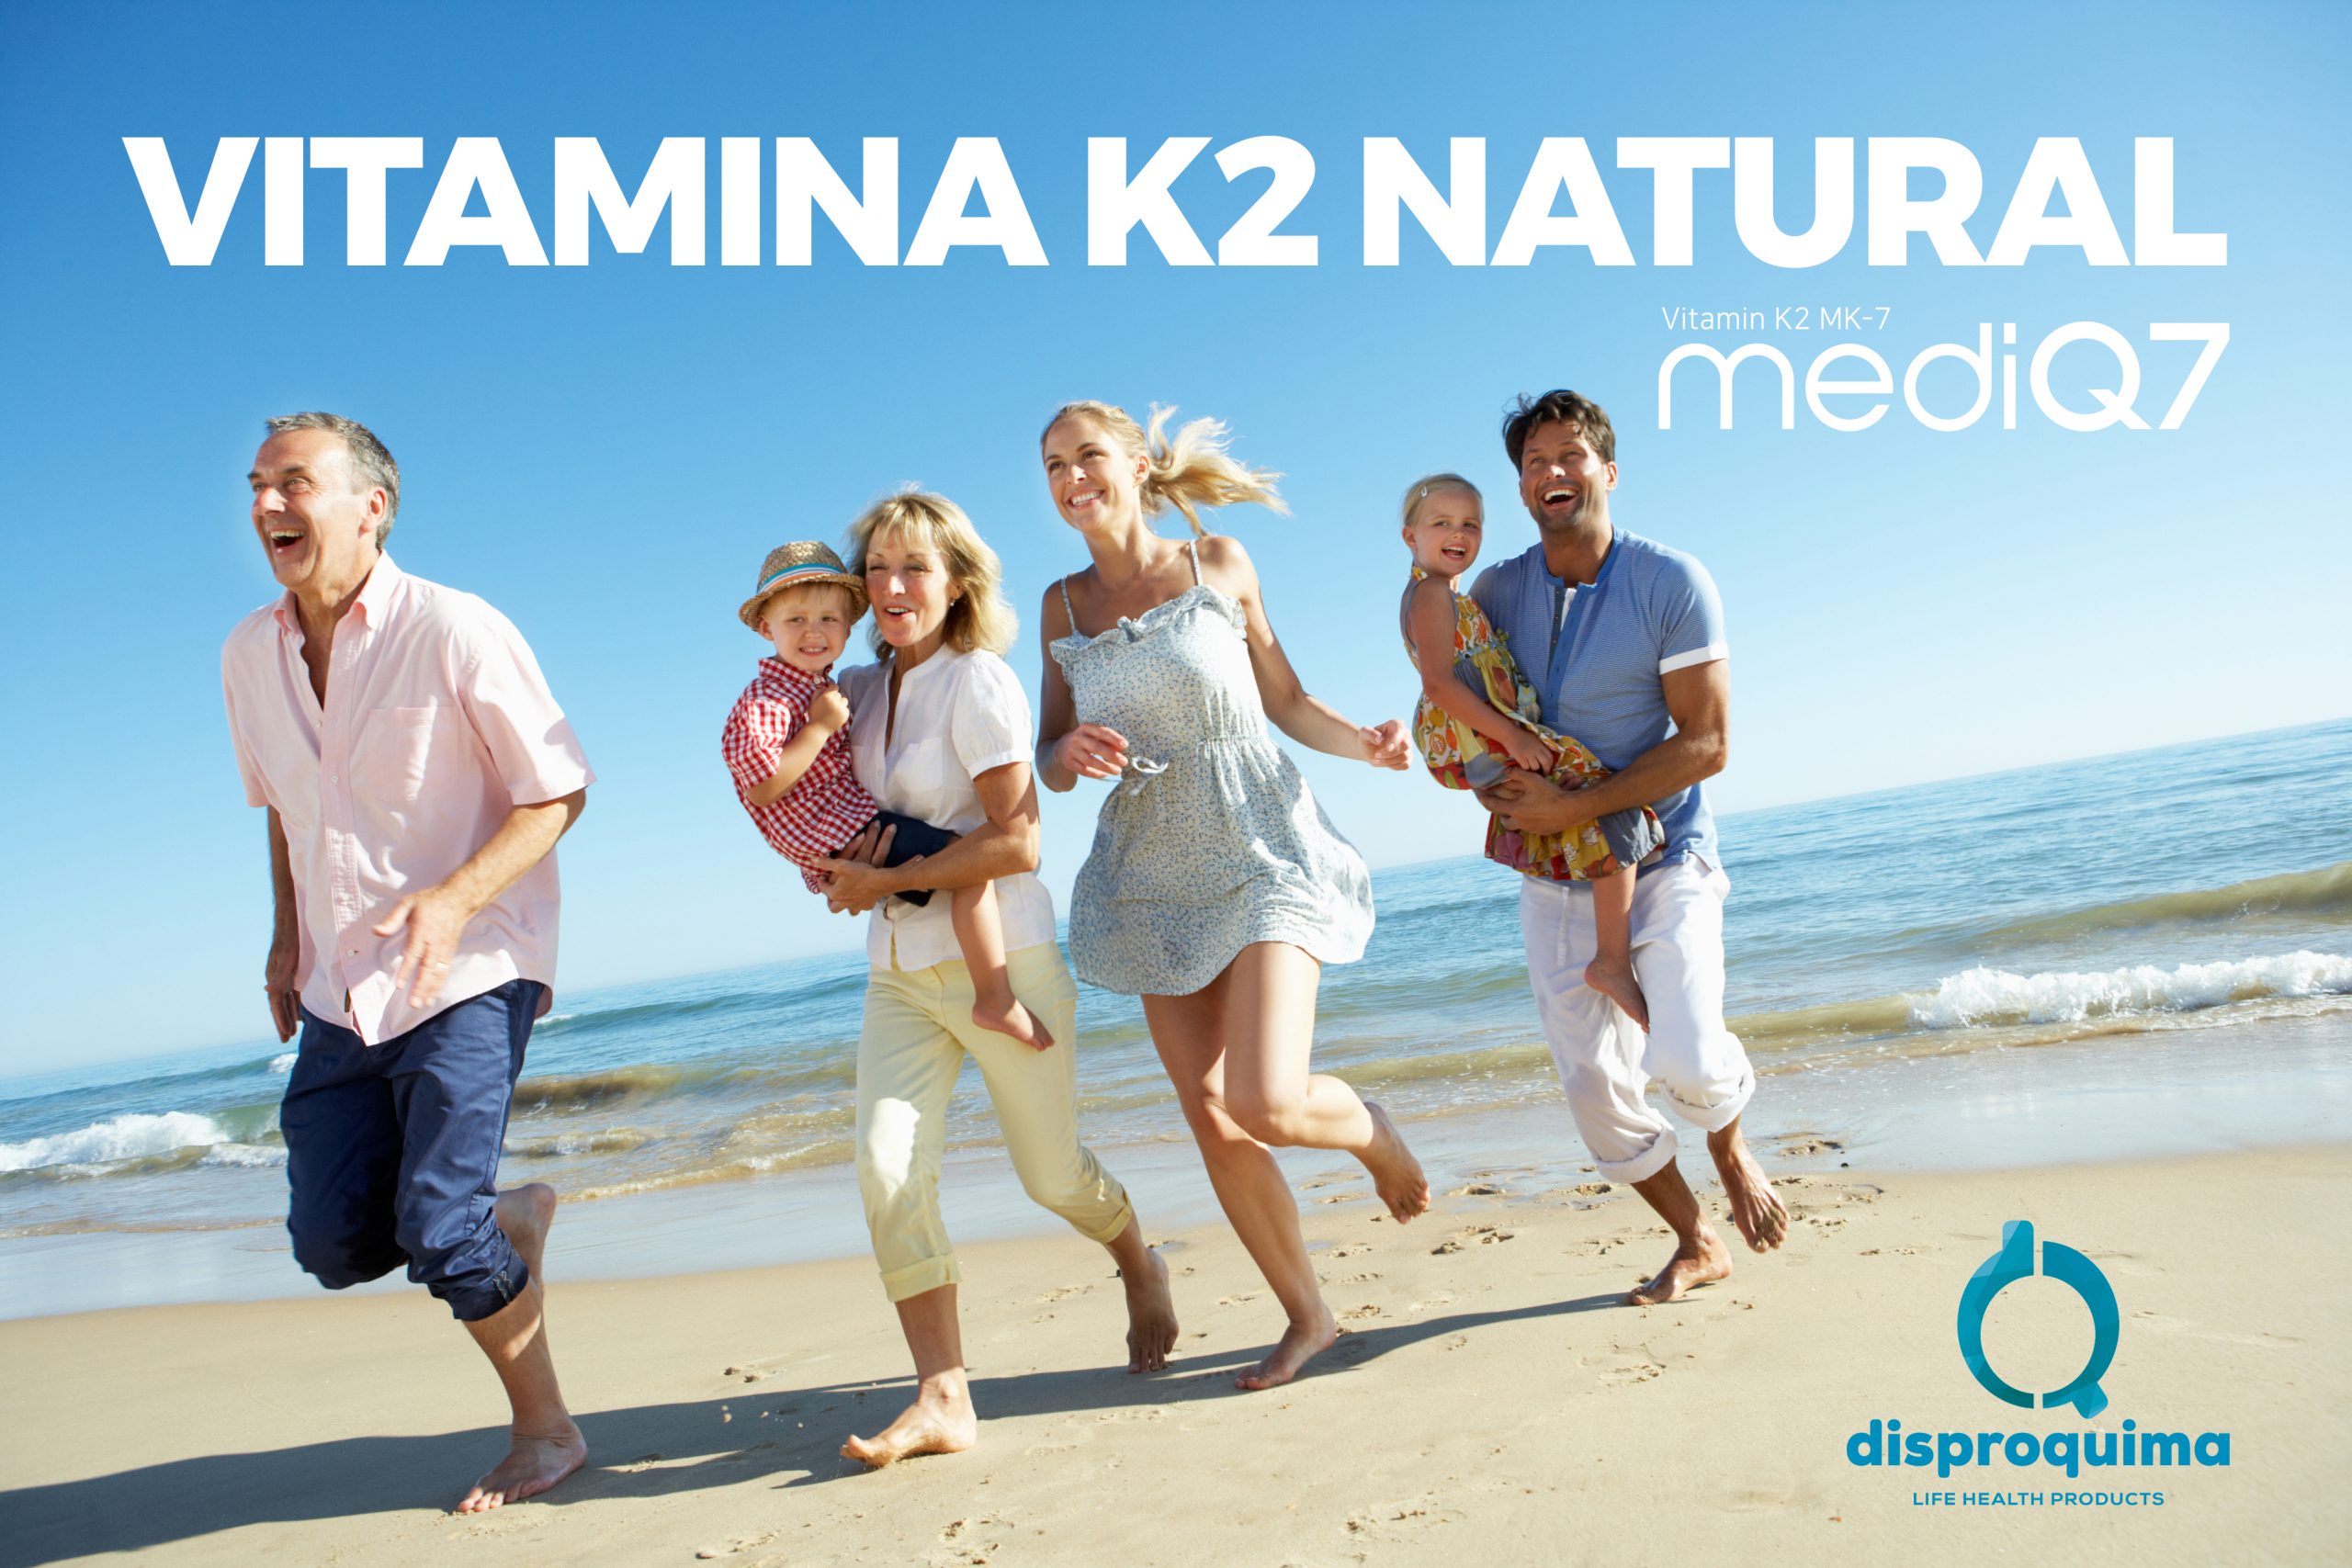 You are currently viewing Natural VITAMIN K2, mediQ7 by DISPROQUIMA